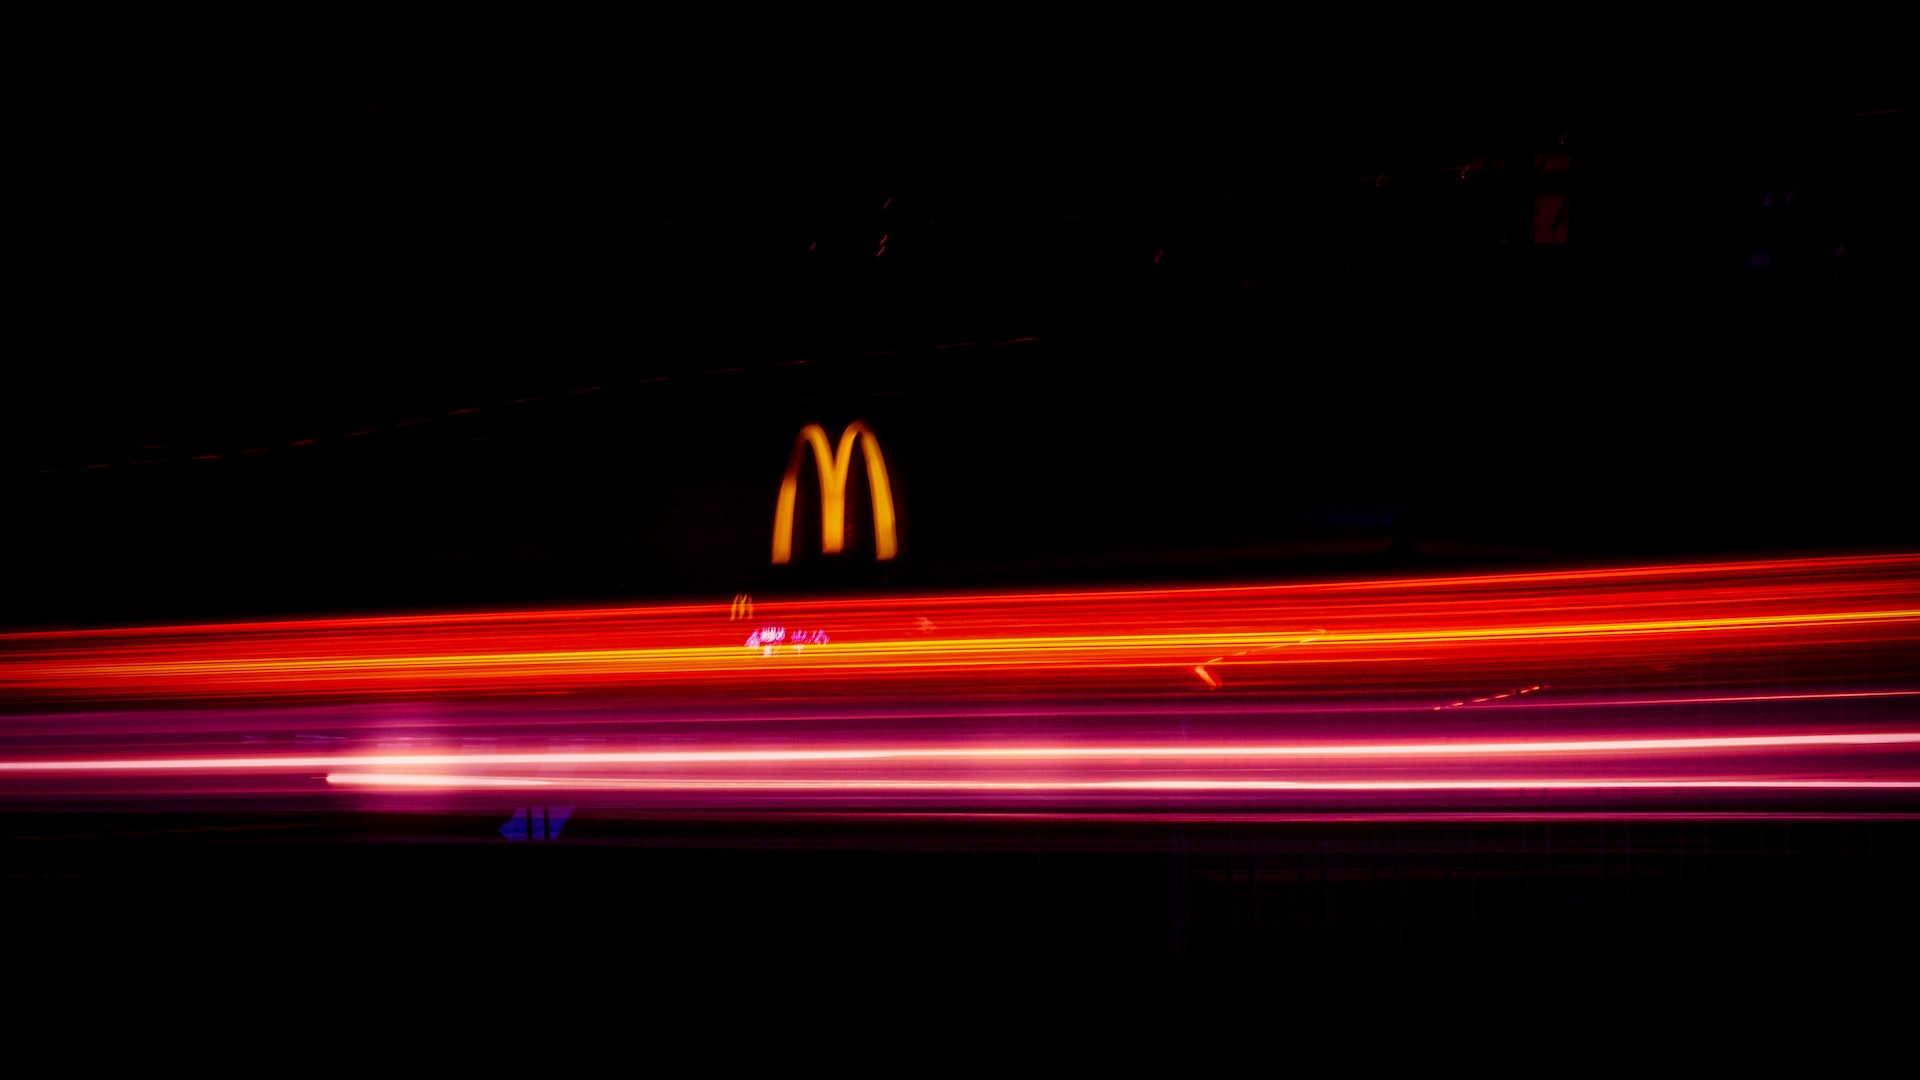 the McDonald's letter M sign